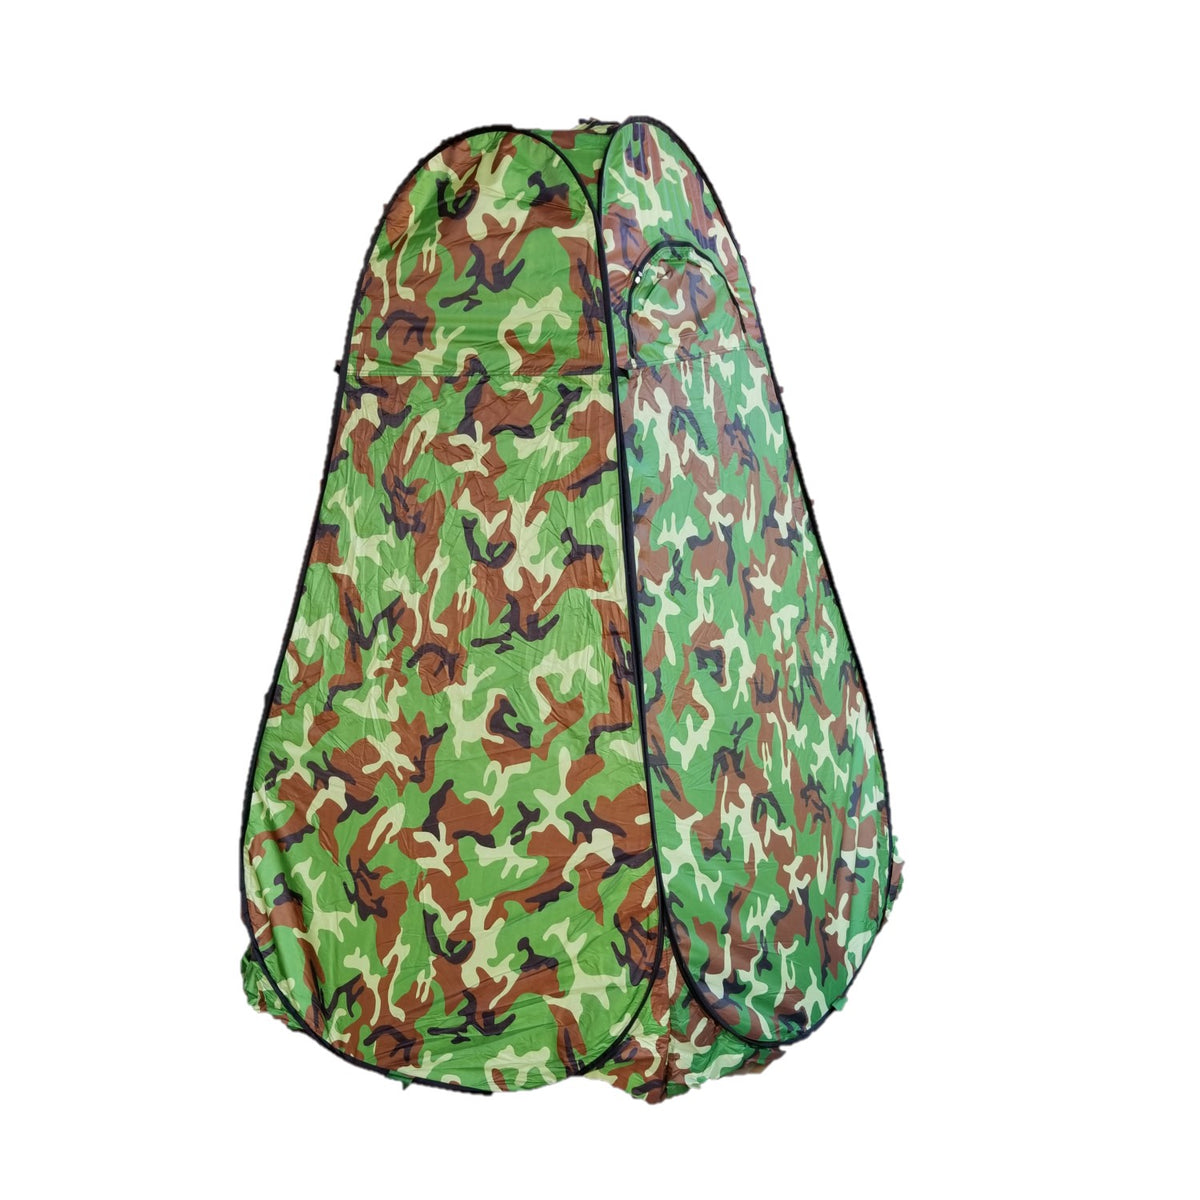 Camouflage Portable Camping Toilet Pop up Tent Privacy Shower